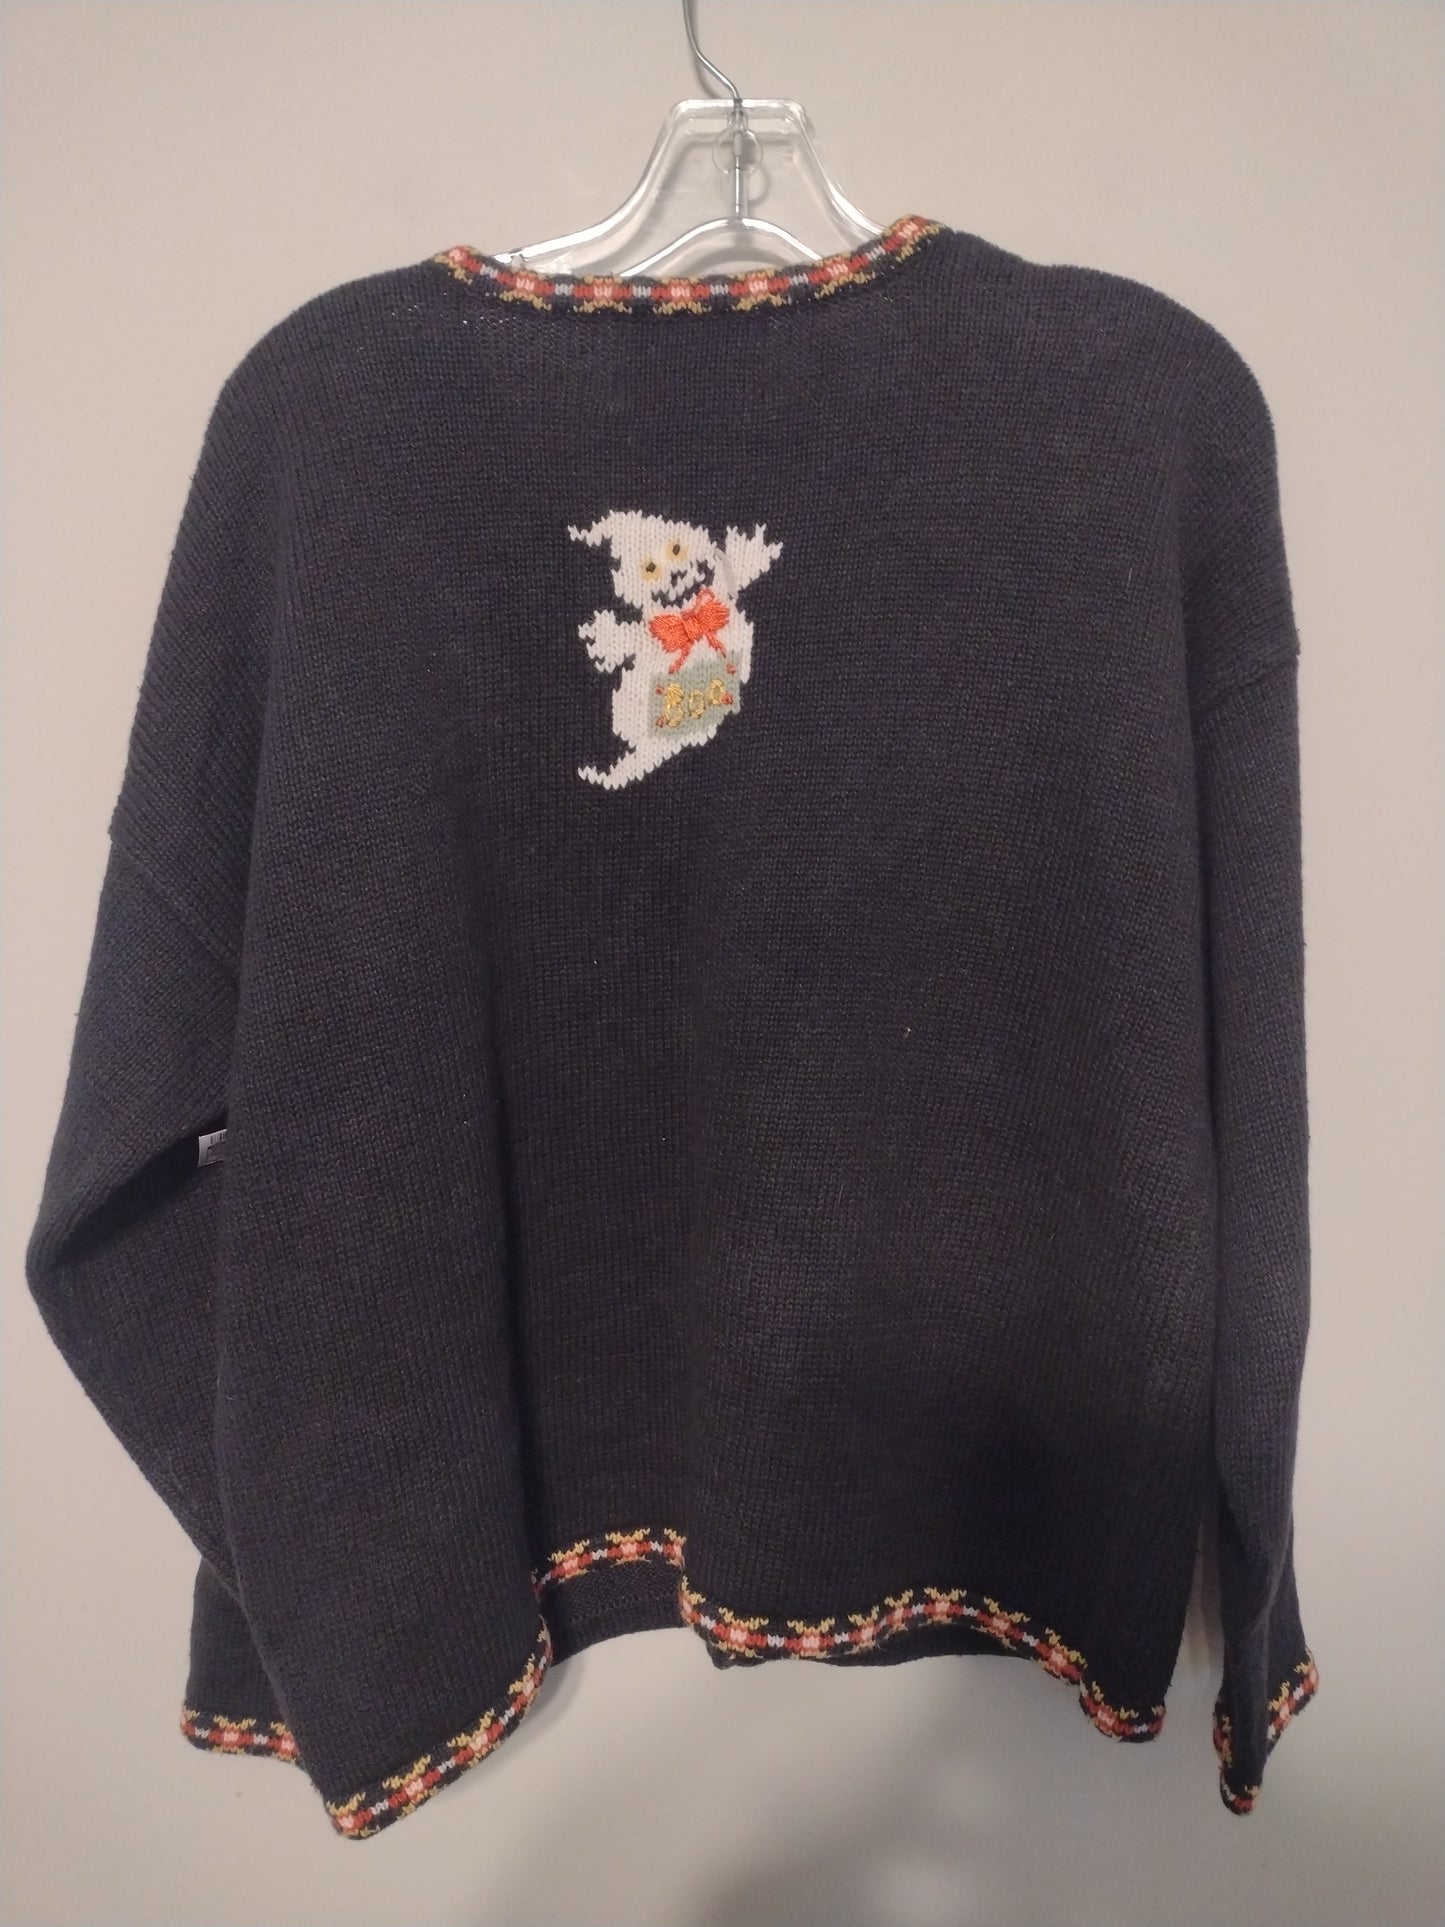 Sweater By Heirloom Collectibles  Size: L